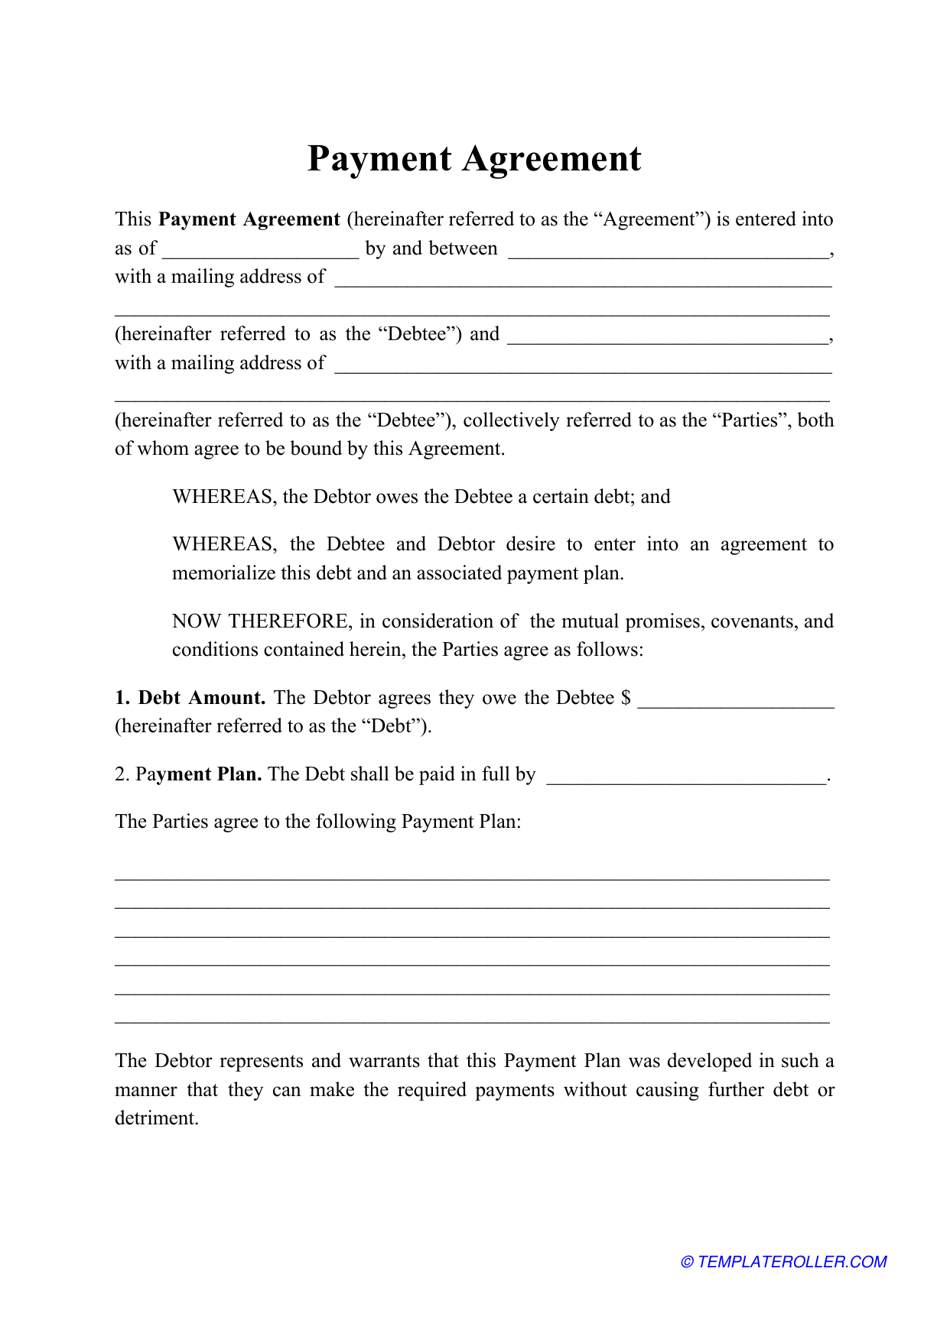 Payment Agreement Template Download Printable PDF  Templateroller Inside legal contract between two parties template